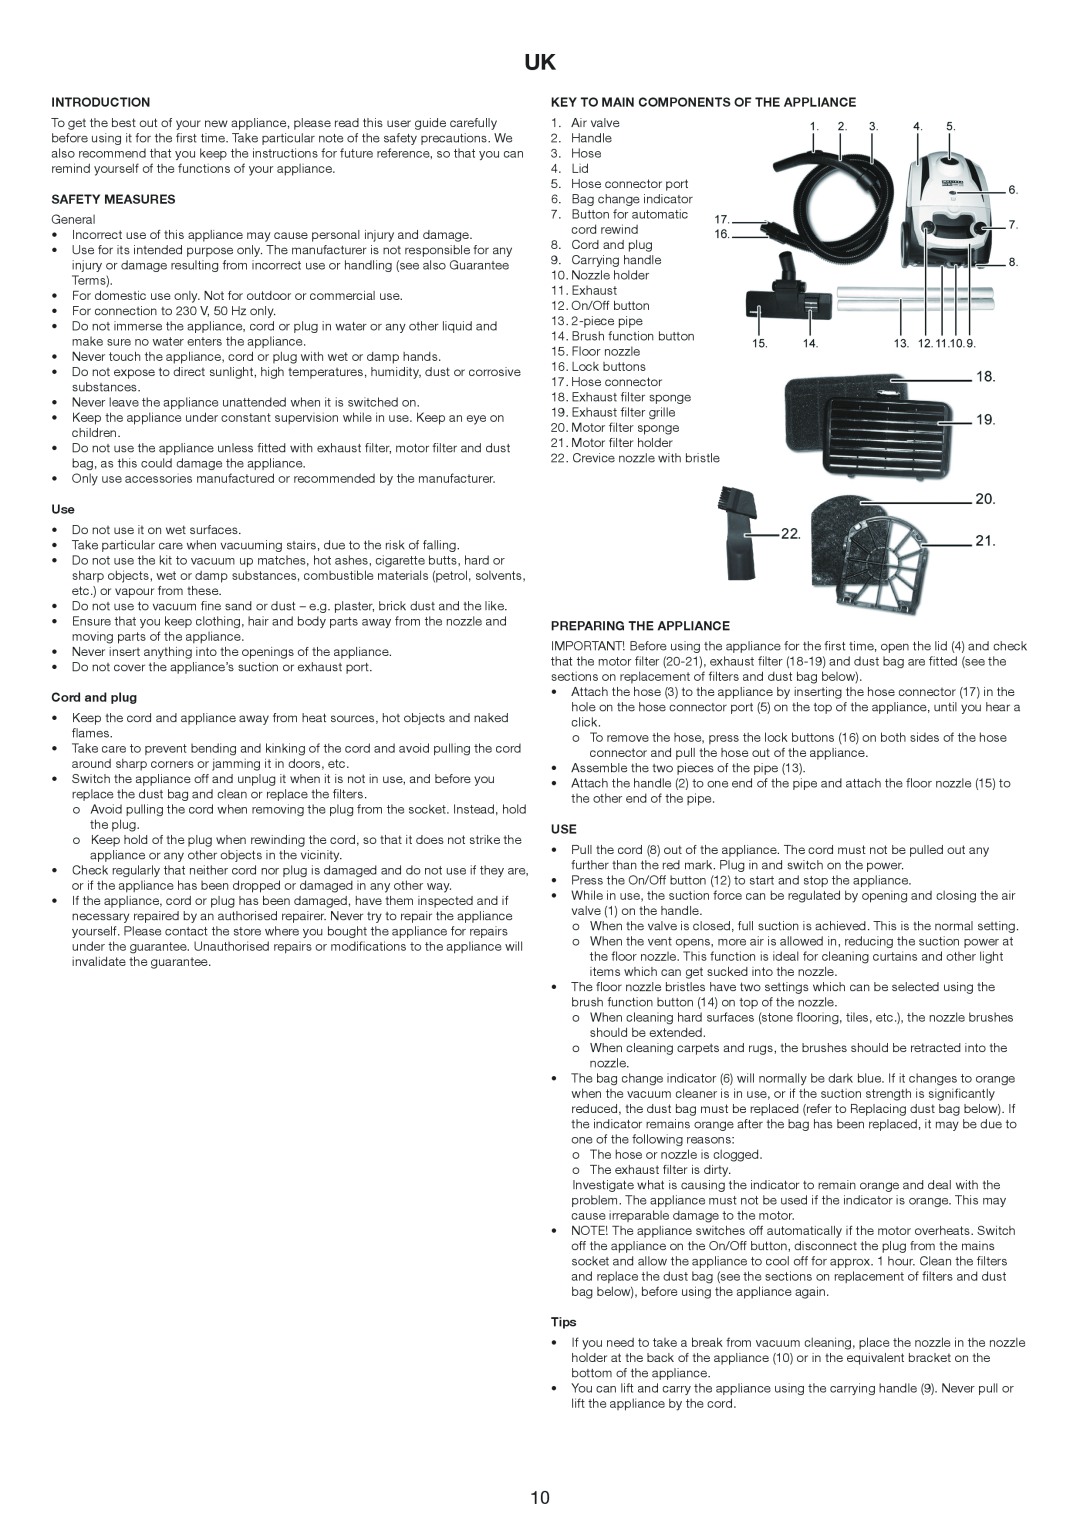 Melissa 640-206 manual Introduction, Safety Measures, Cord and plug, Key To Main Components Of The Appliance, Tips 